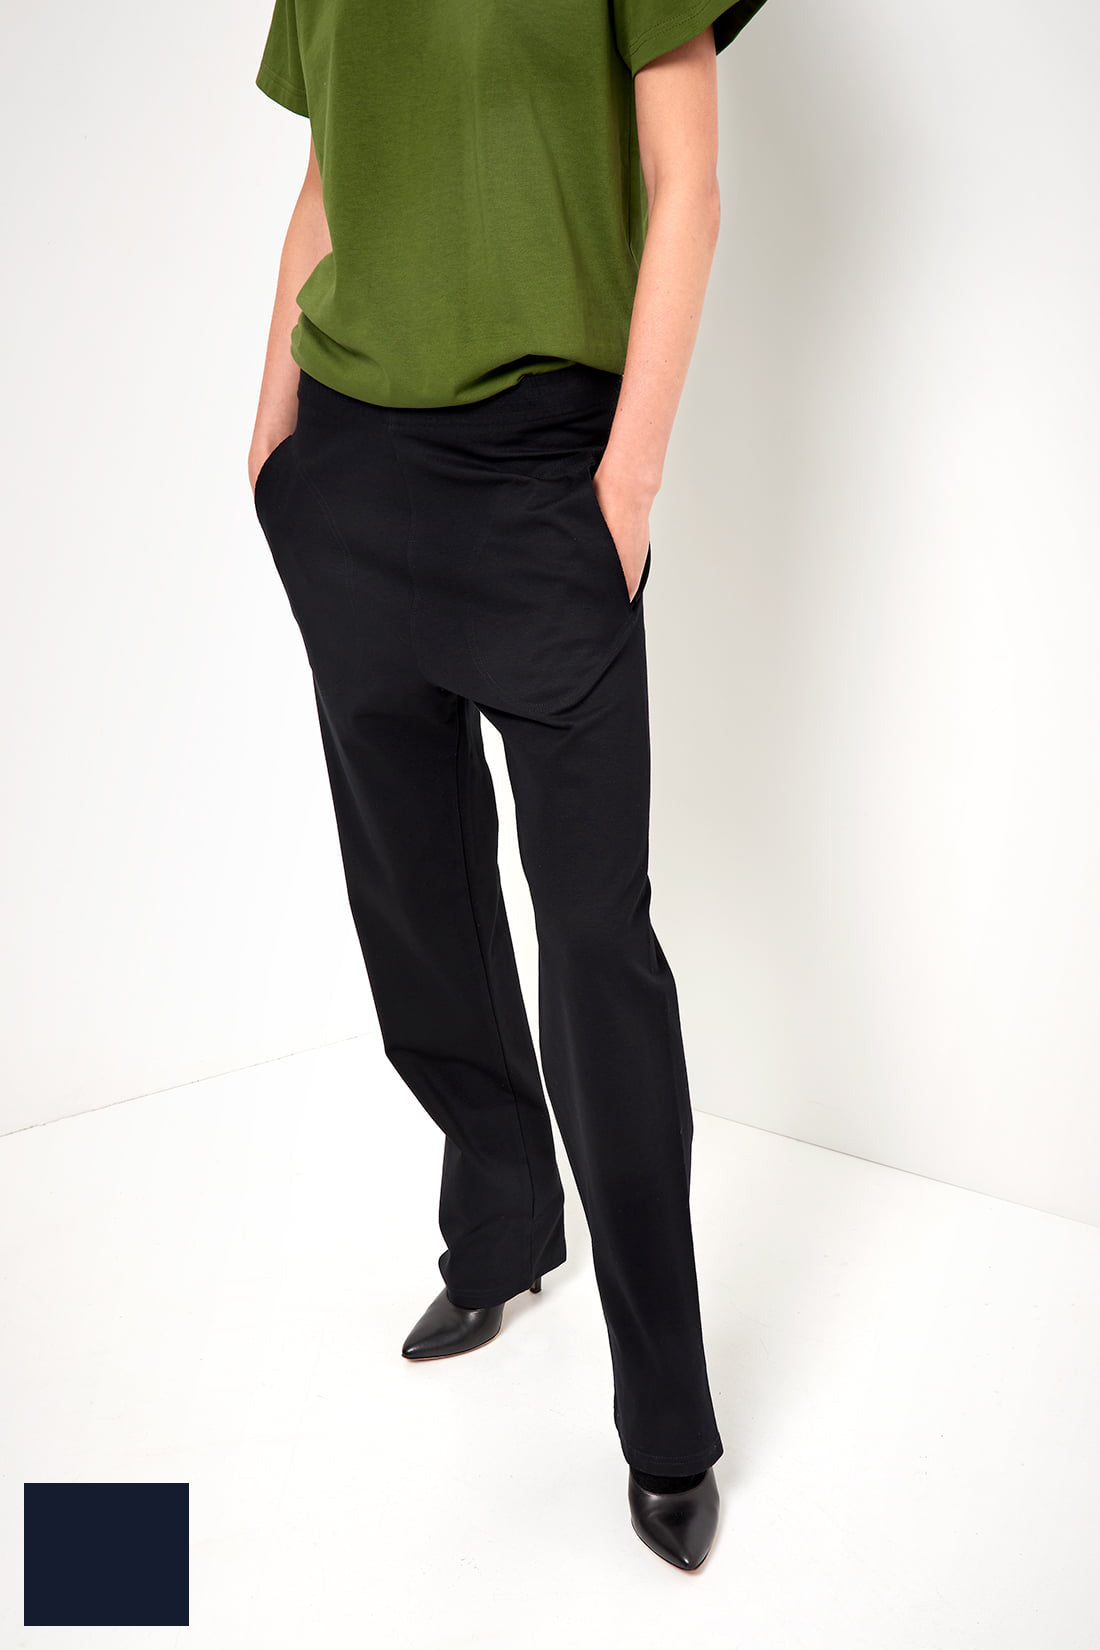 trousers Relax navy lycra